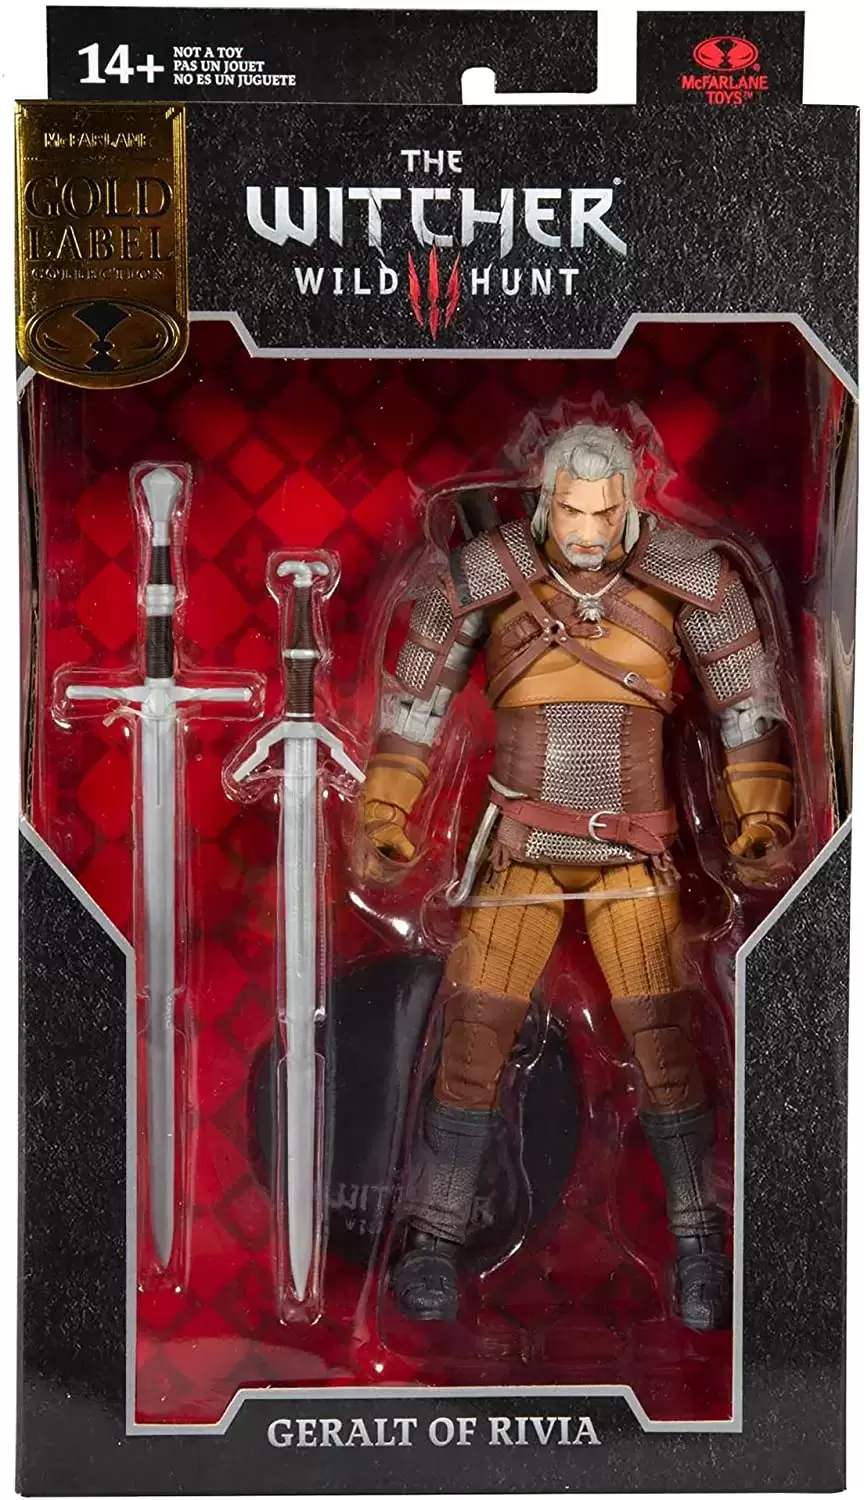 McFarlane - The Witcher - Geralt of Rivia - Gold Label